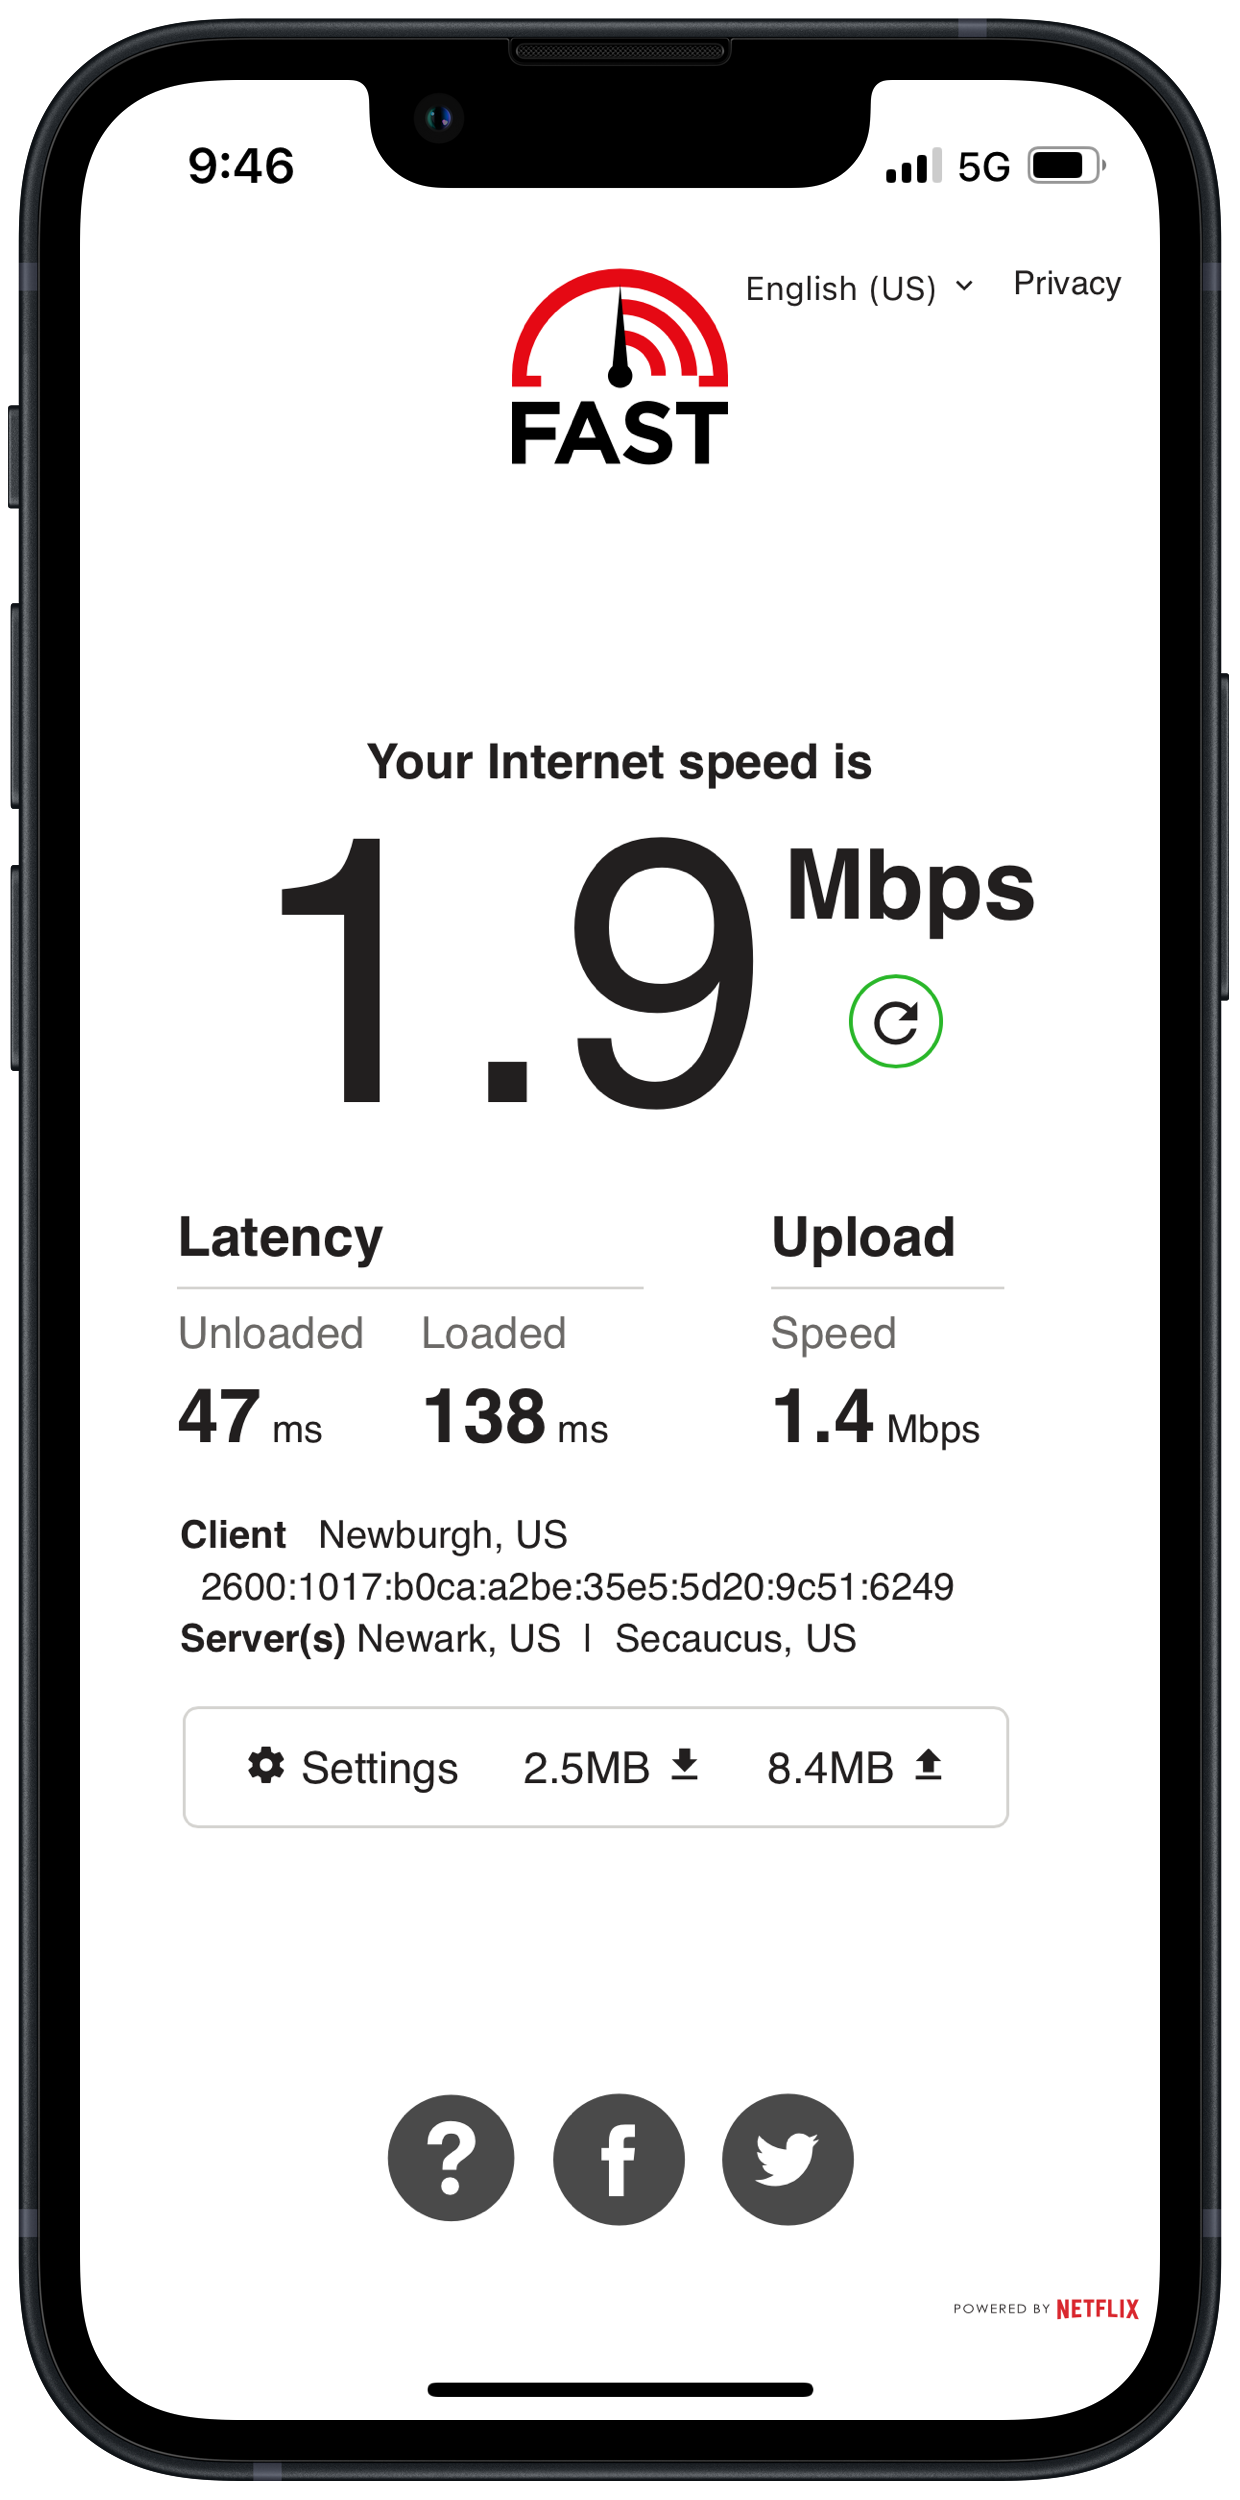 A smartphone displays internet speed results: 1.9 Mbps download, 1.4 Mbps upload, with latency measurements, against a white background with a FAST logo at the top.